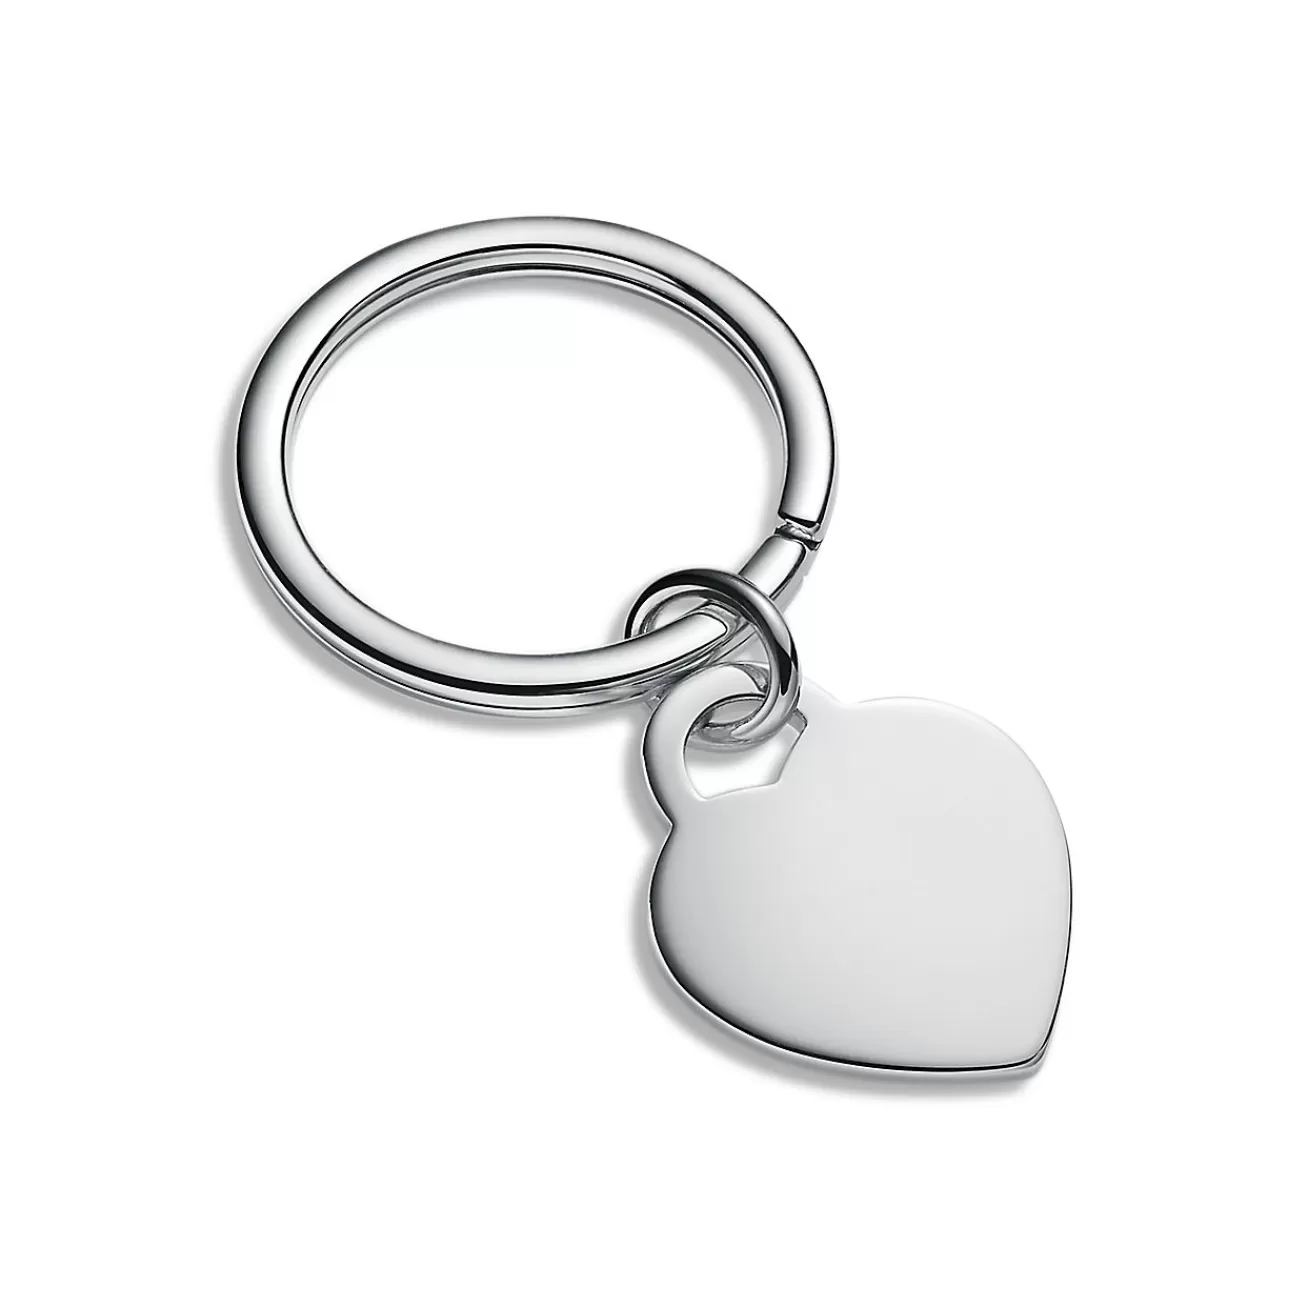 Tiffany & Co. Personal Essentials Heart Tag Key Ring in Sterling Silver | ^Women Key Rings | Women's Accessories